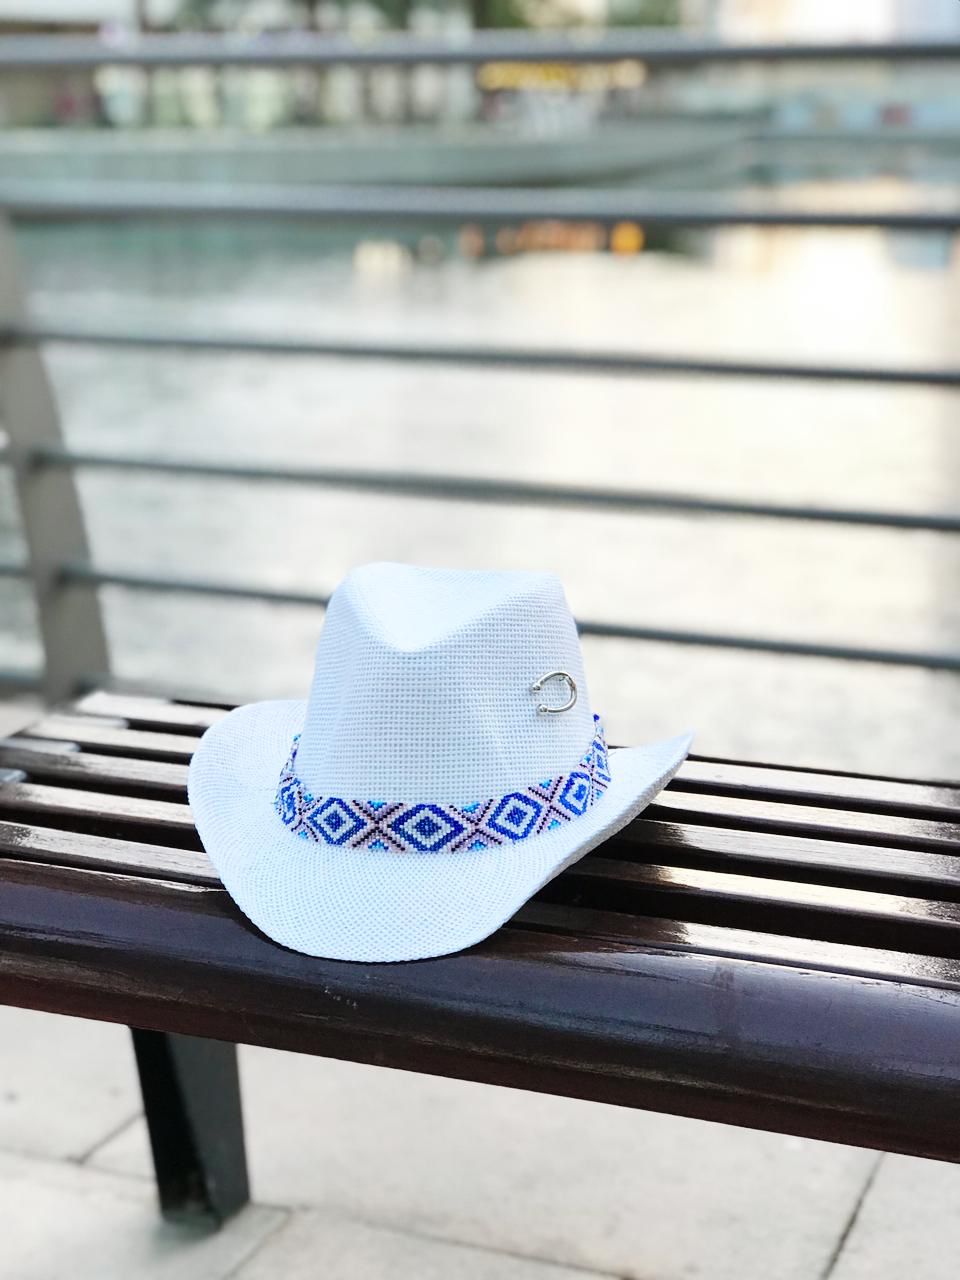 White cowboy hat with blue beads